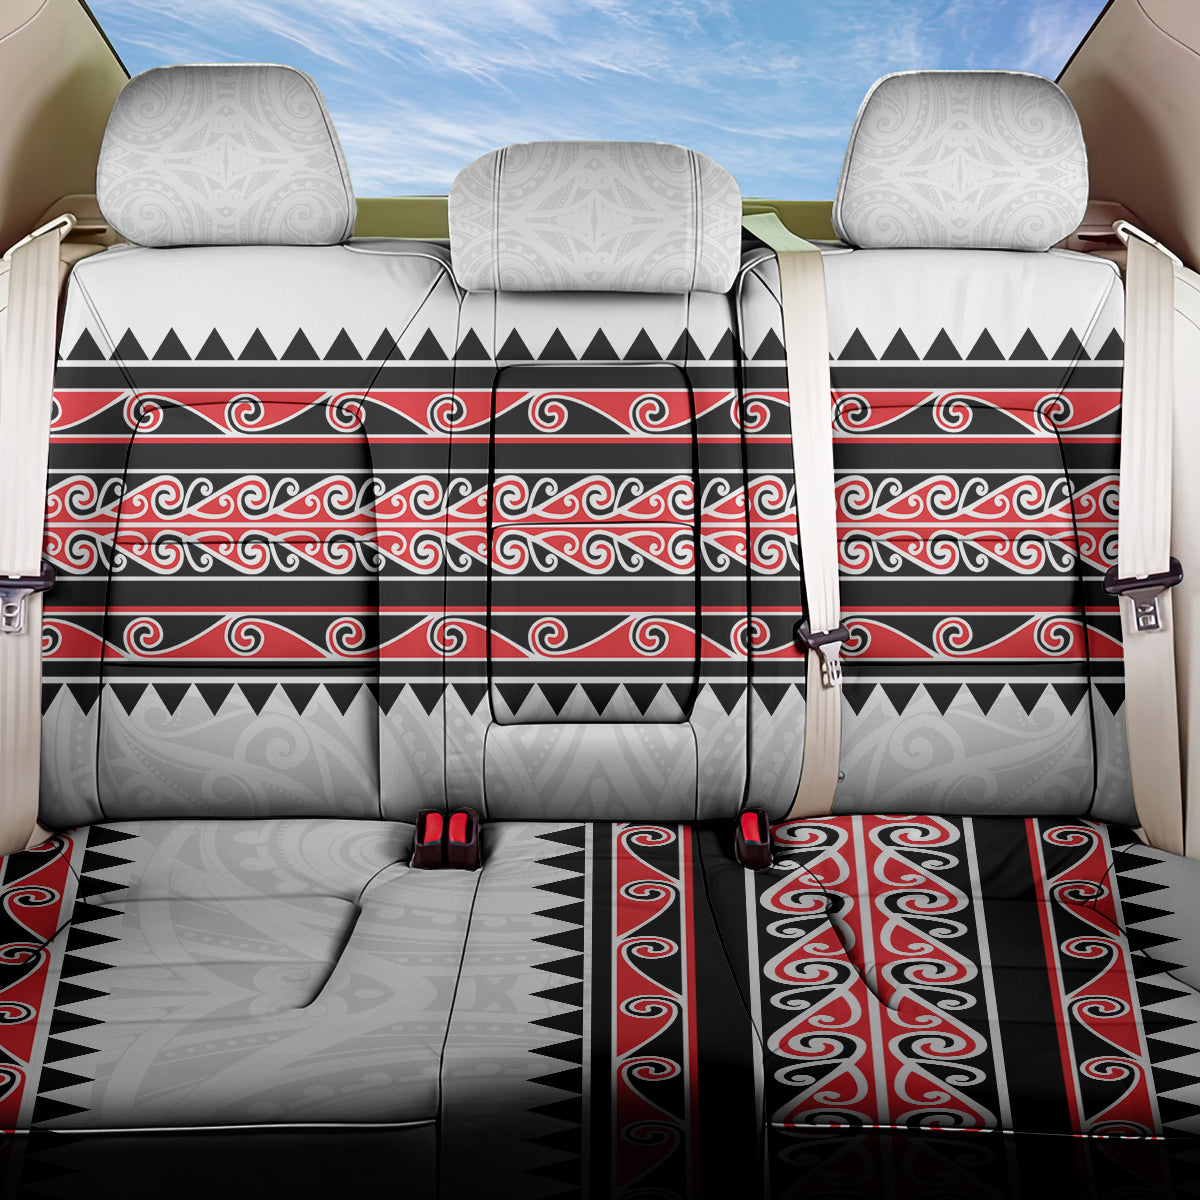 New Zealand Aotearoa Back Car Seat Cover With Kowhaiwhai Pattern Red Version LT05 One Size Red - Polynesian Pride